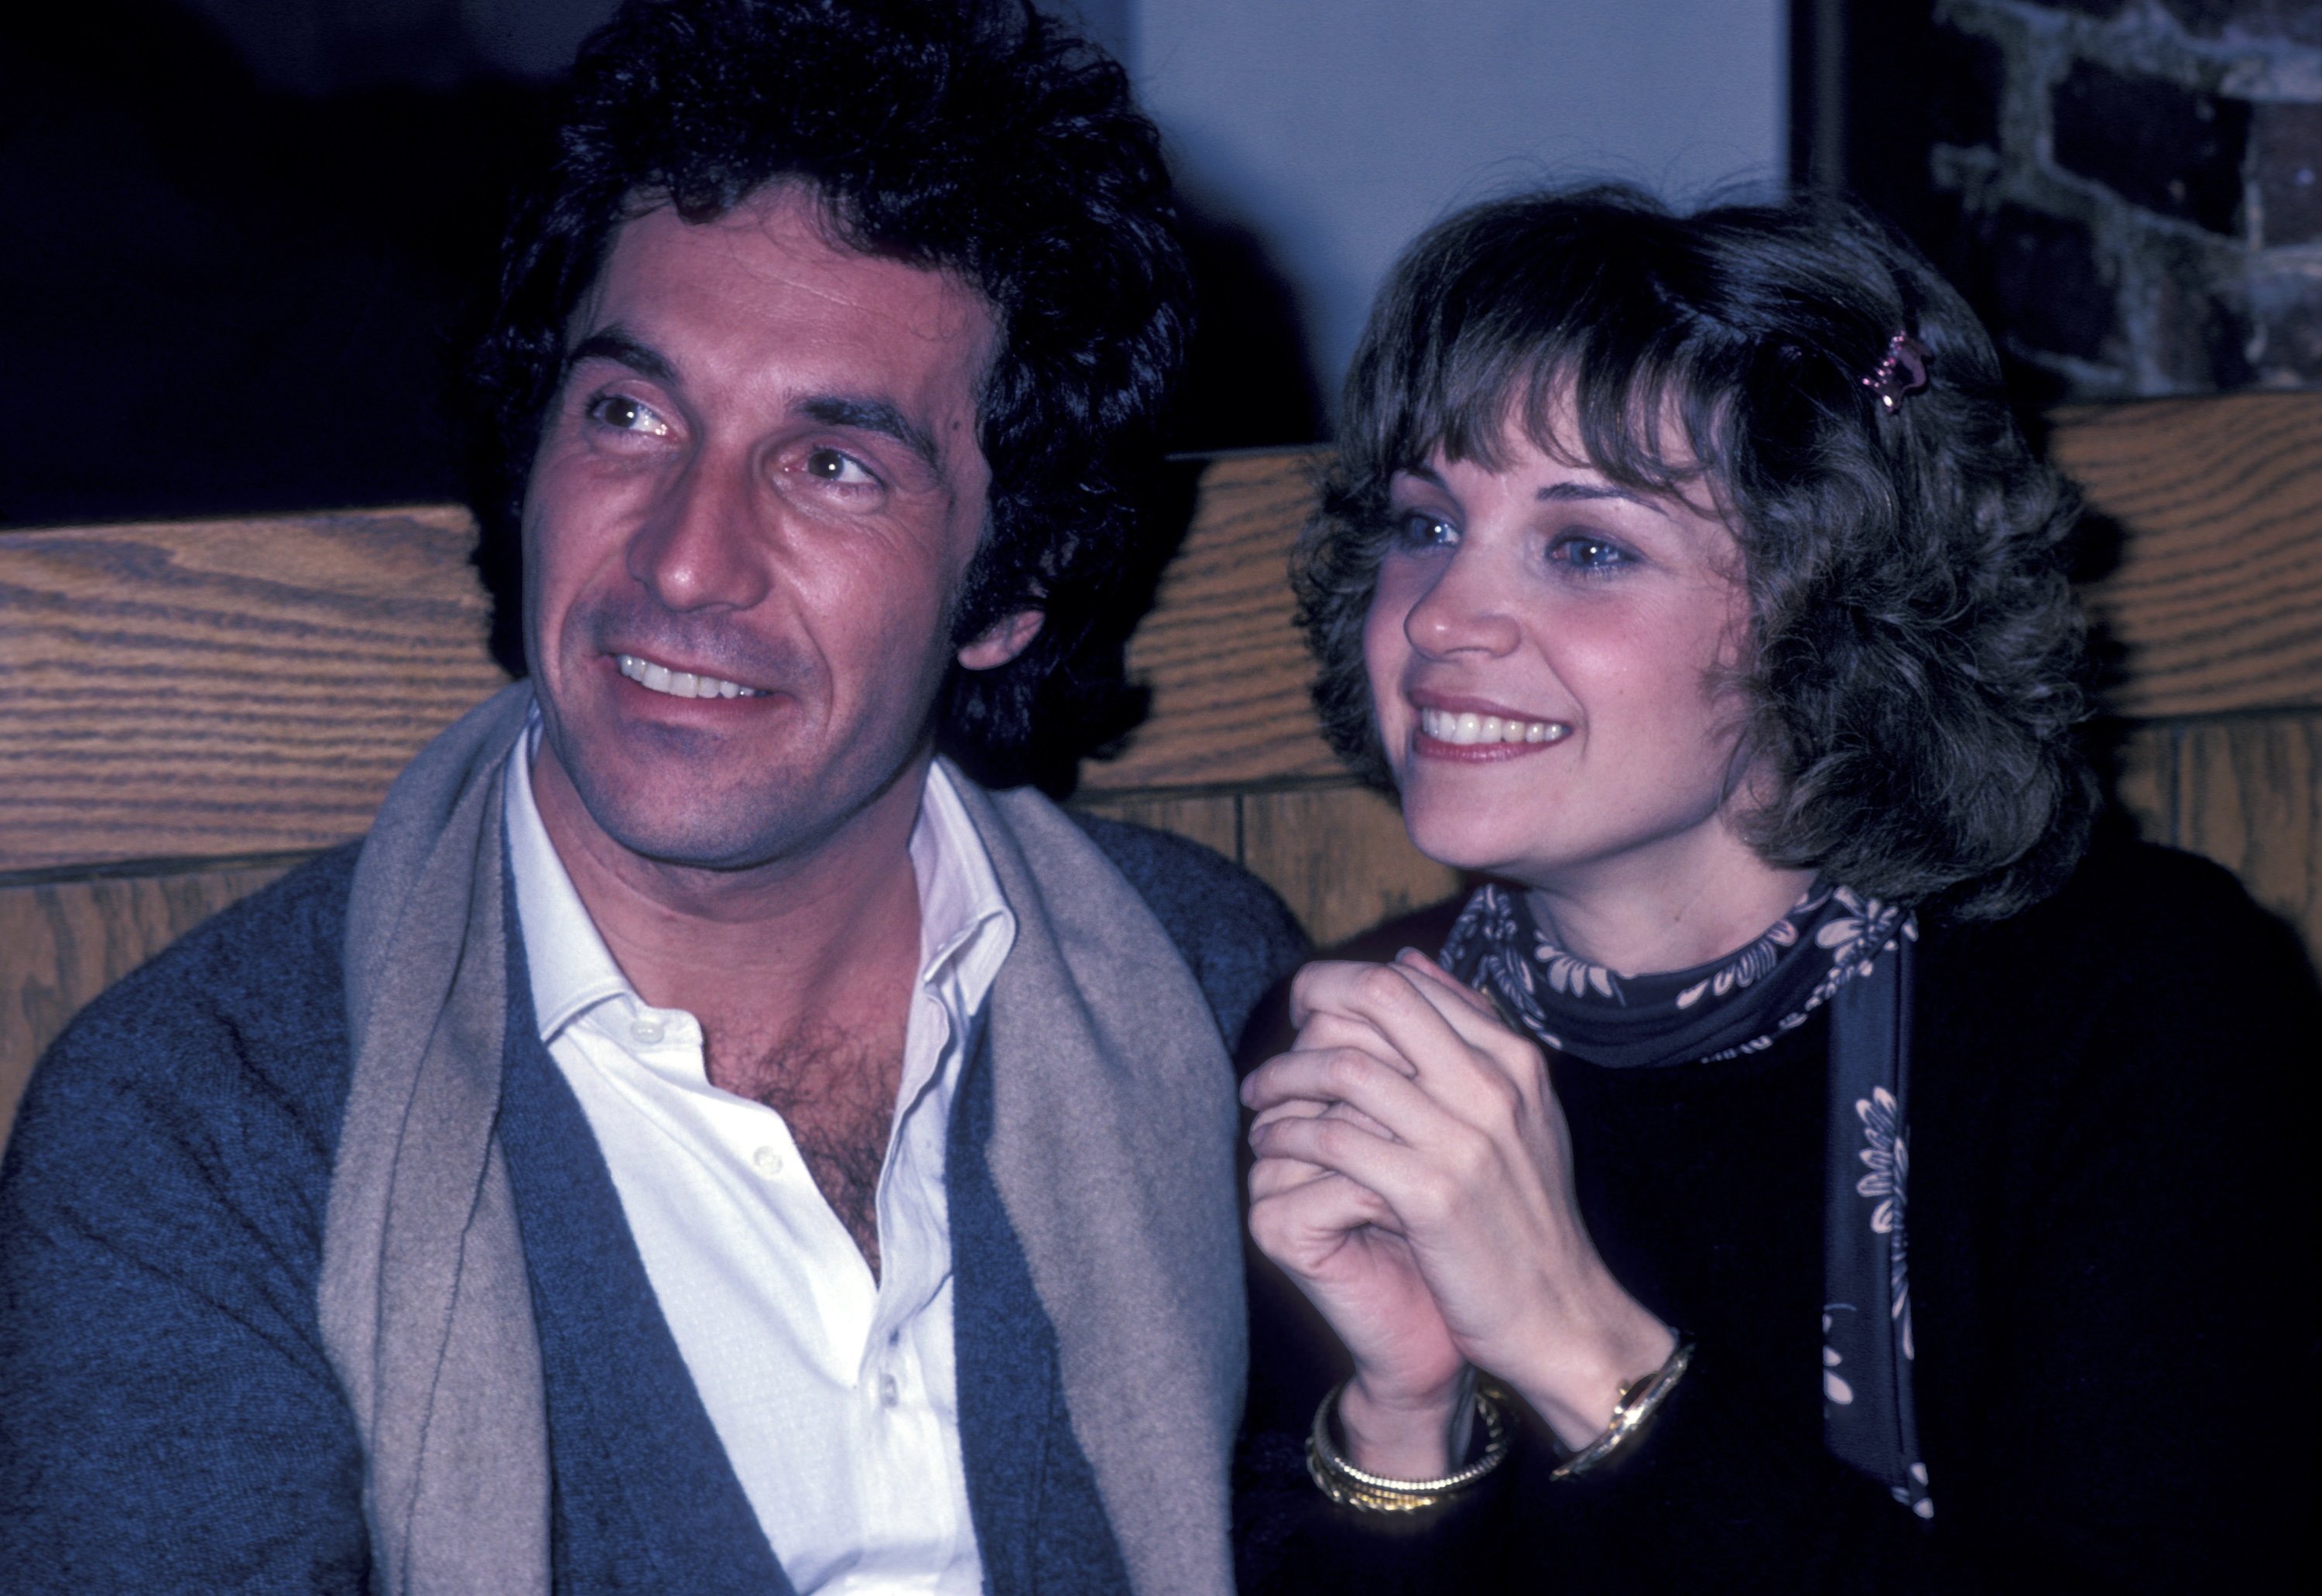 Bill Hudson and Cindy Williams at a "Hysterical" wrap party on February 1, 1982 ┃Source: Getty Images